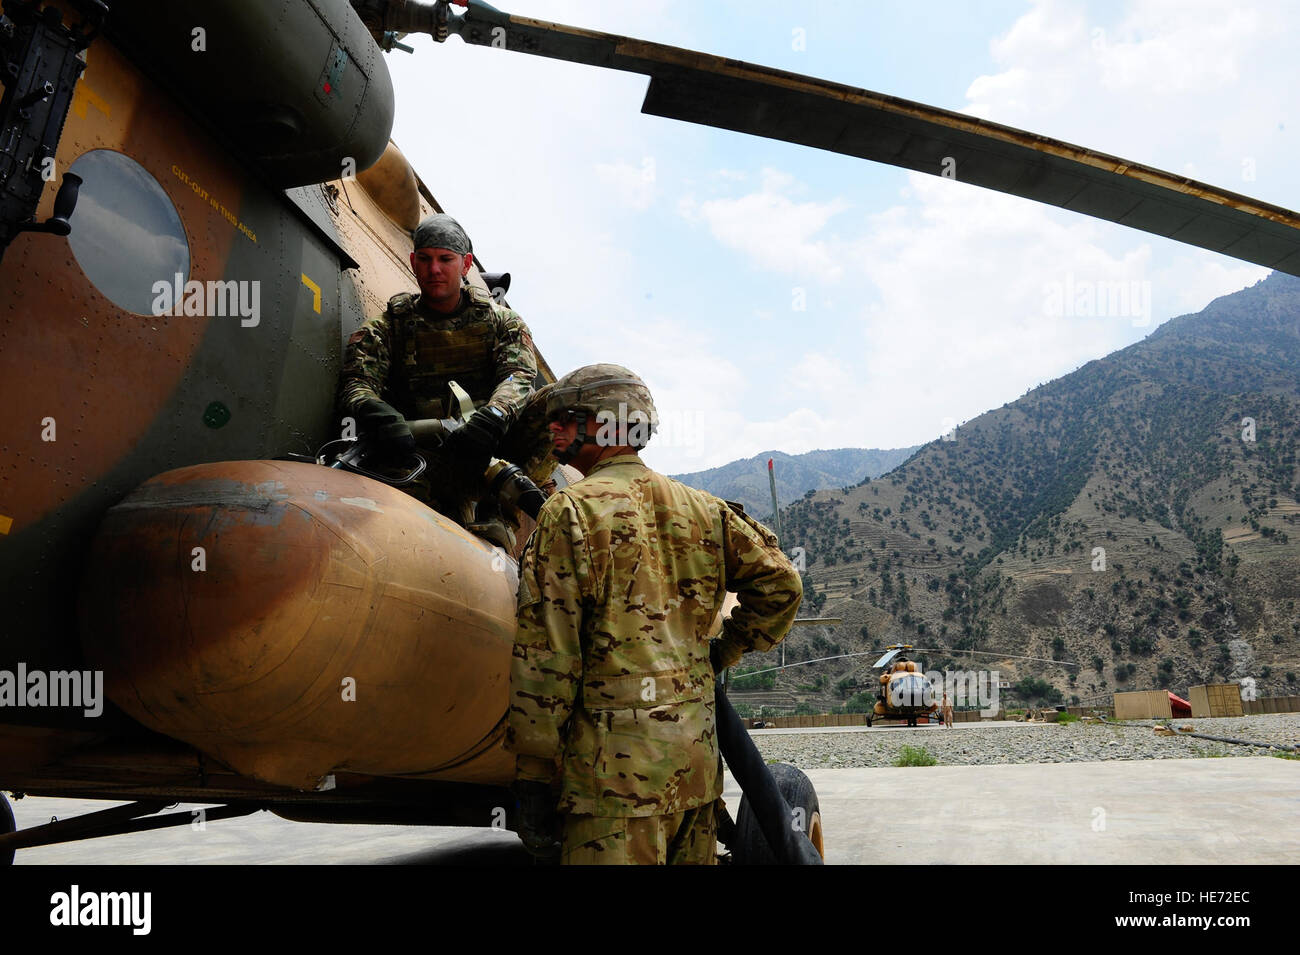 U.S. Air Force Tech. Sgt. Miguel Acevedo, top, fills the fuel tank of an Mi-17 helicopter for a resupply mission July 8, 2012, at Forward Operating Base Bostick in Kunar province, Afghanistan. The joint mission of the Afghan air force and U.S. Air Force Mi-17 helicopter crews was to resupply Afghan forces in remote locations.  Staff Sgt. Quinton Russ Stock Photo